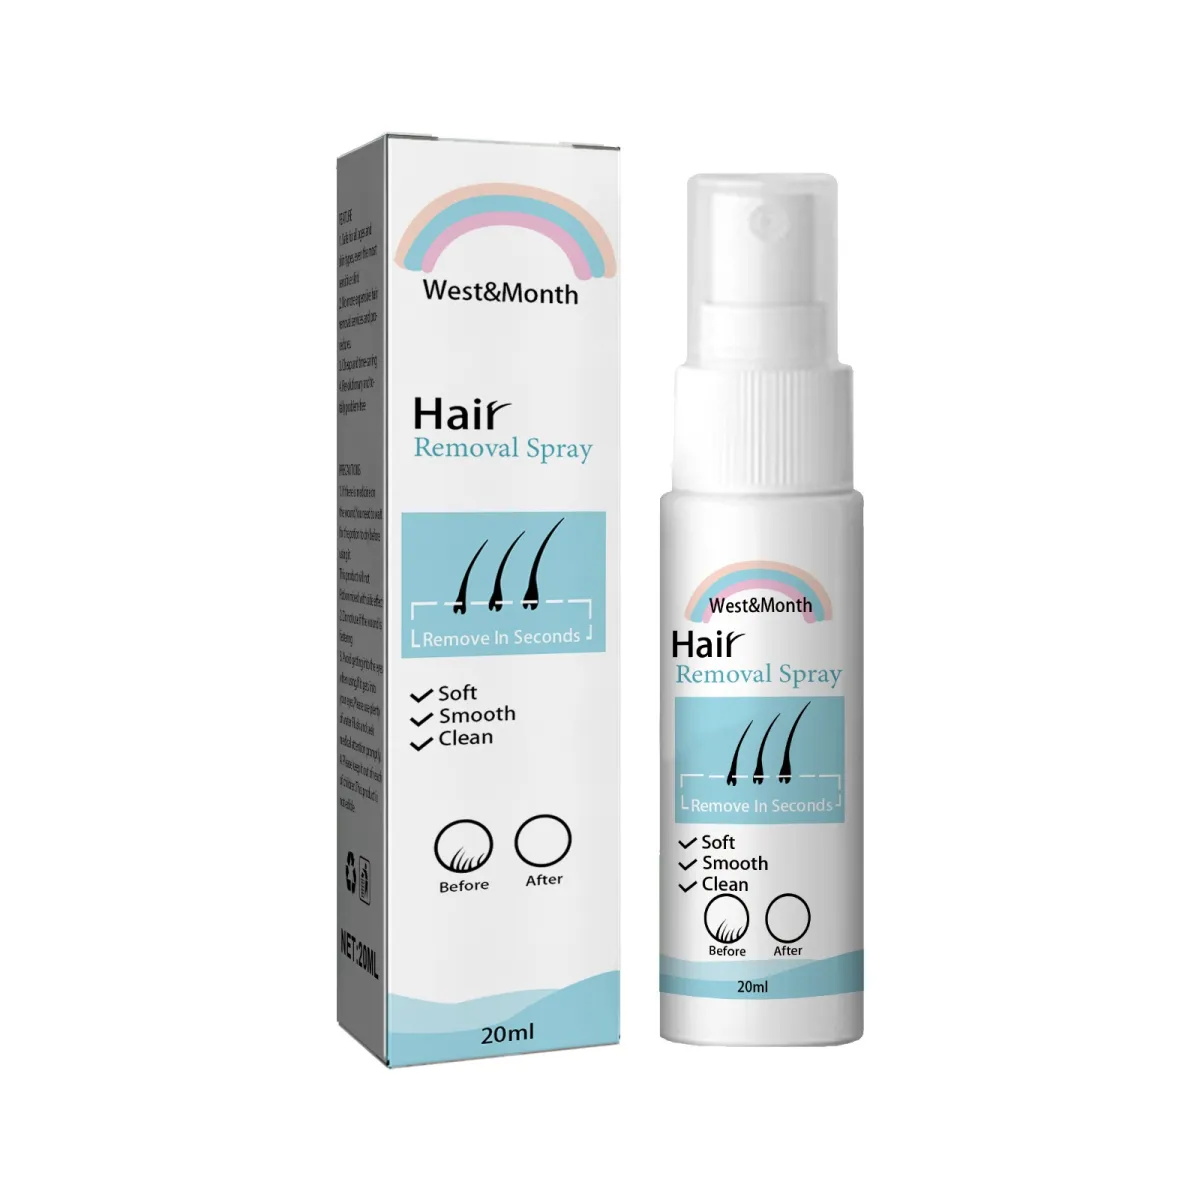 Buy UrbanGabru Hair Removal Spray (200 ml) | Hair removal in a painless  manner | Lemon Fragrance Online at Low Prices in India - Amazon.in